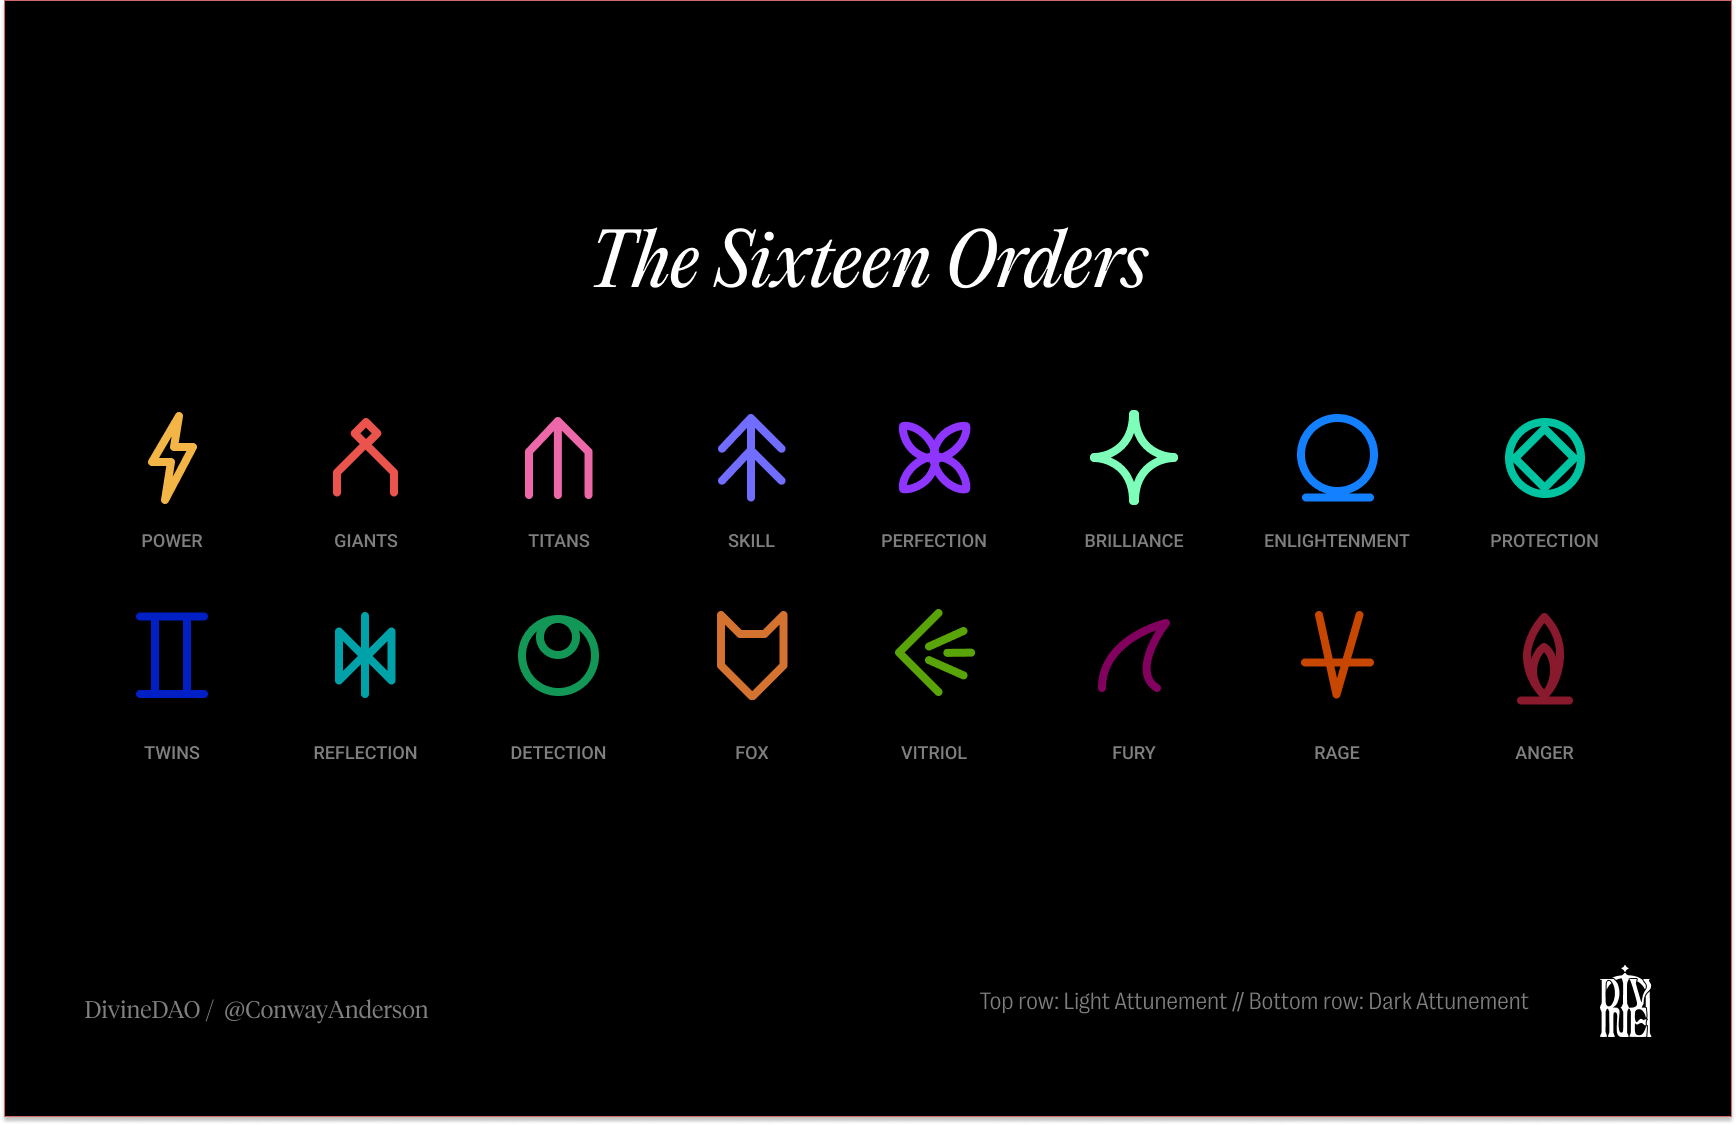 The Orders